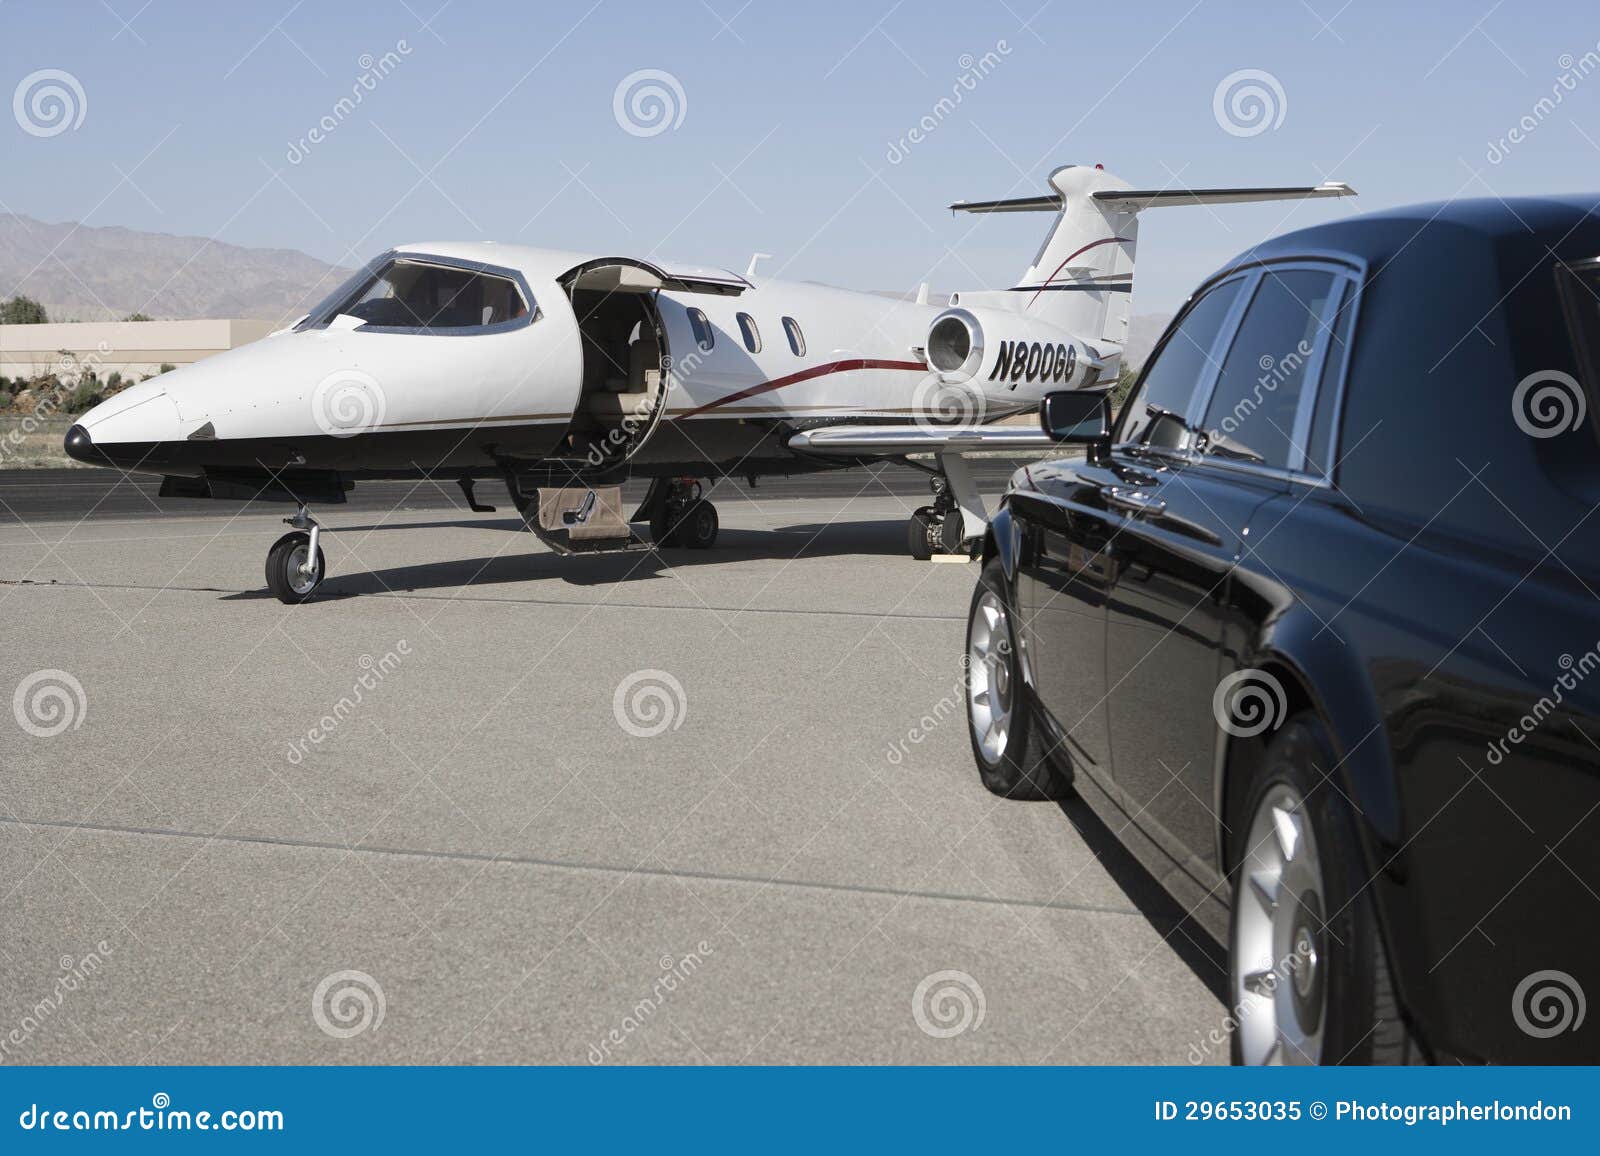 luxurious car and airplane